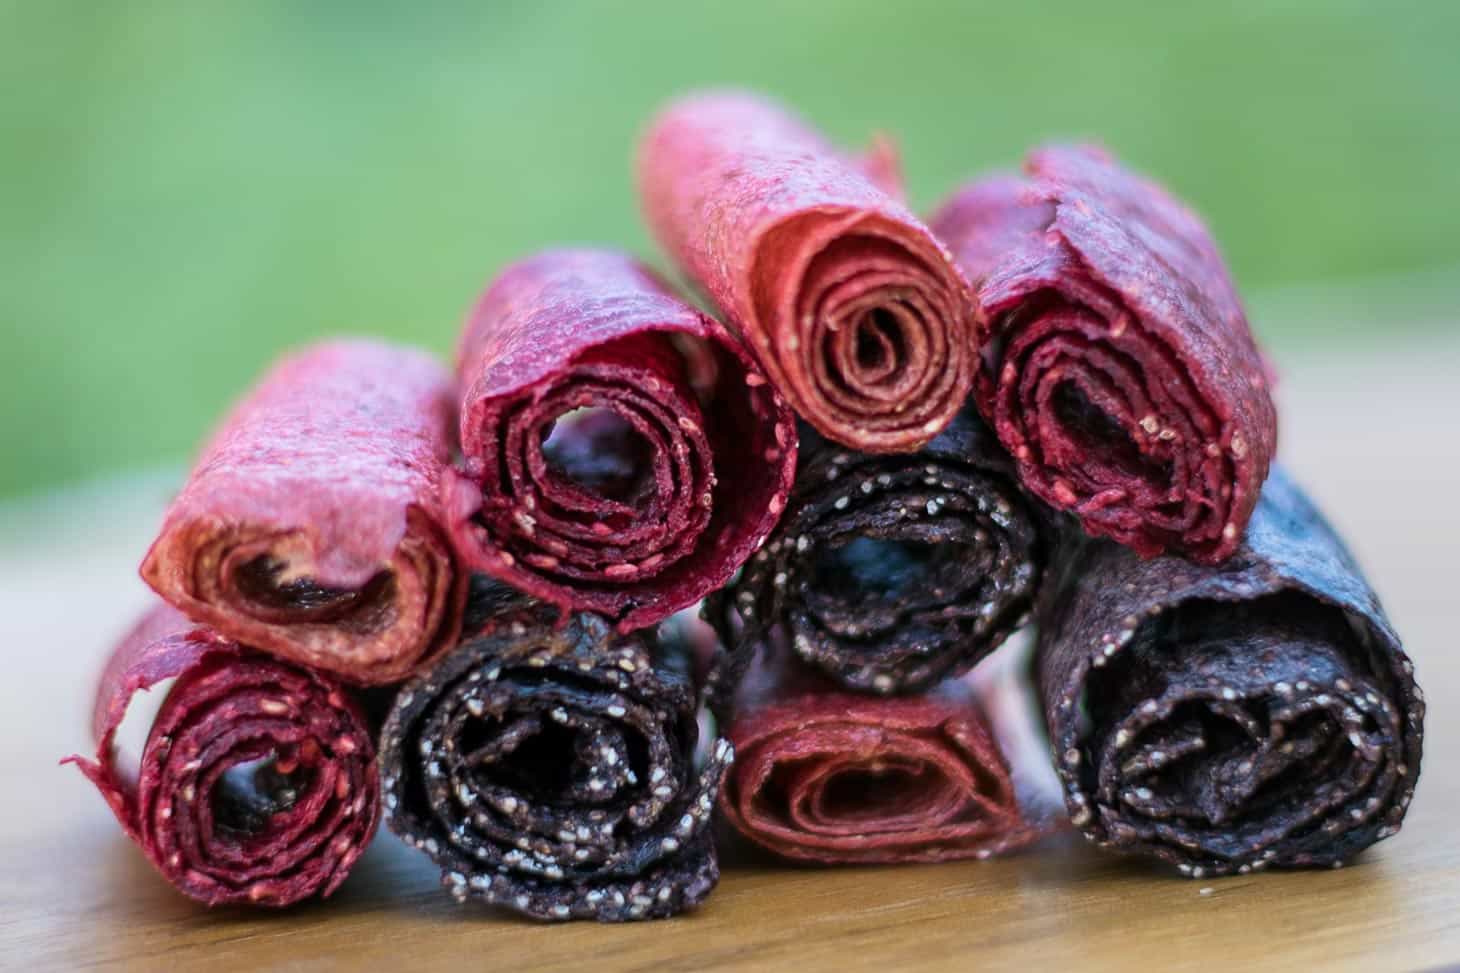 How To Make Fruit Leather In A Dehydrator